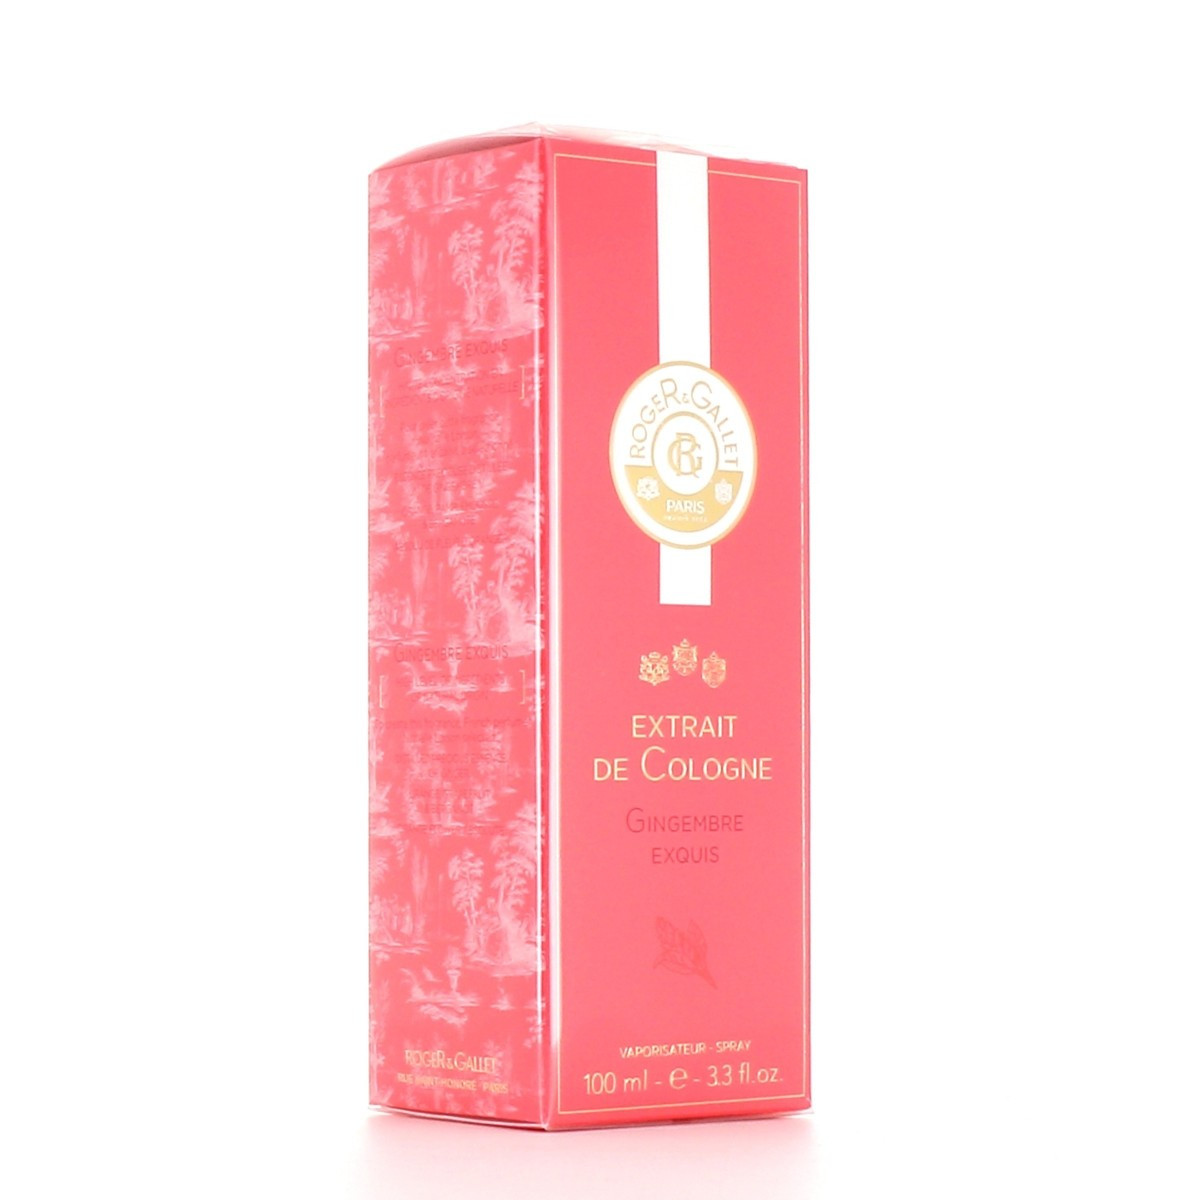 roger & gallet gingembre exquis